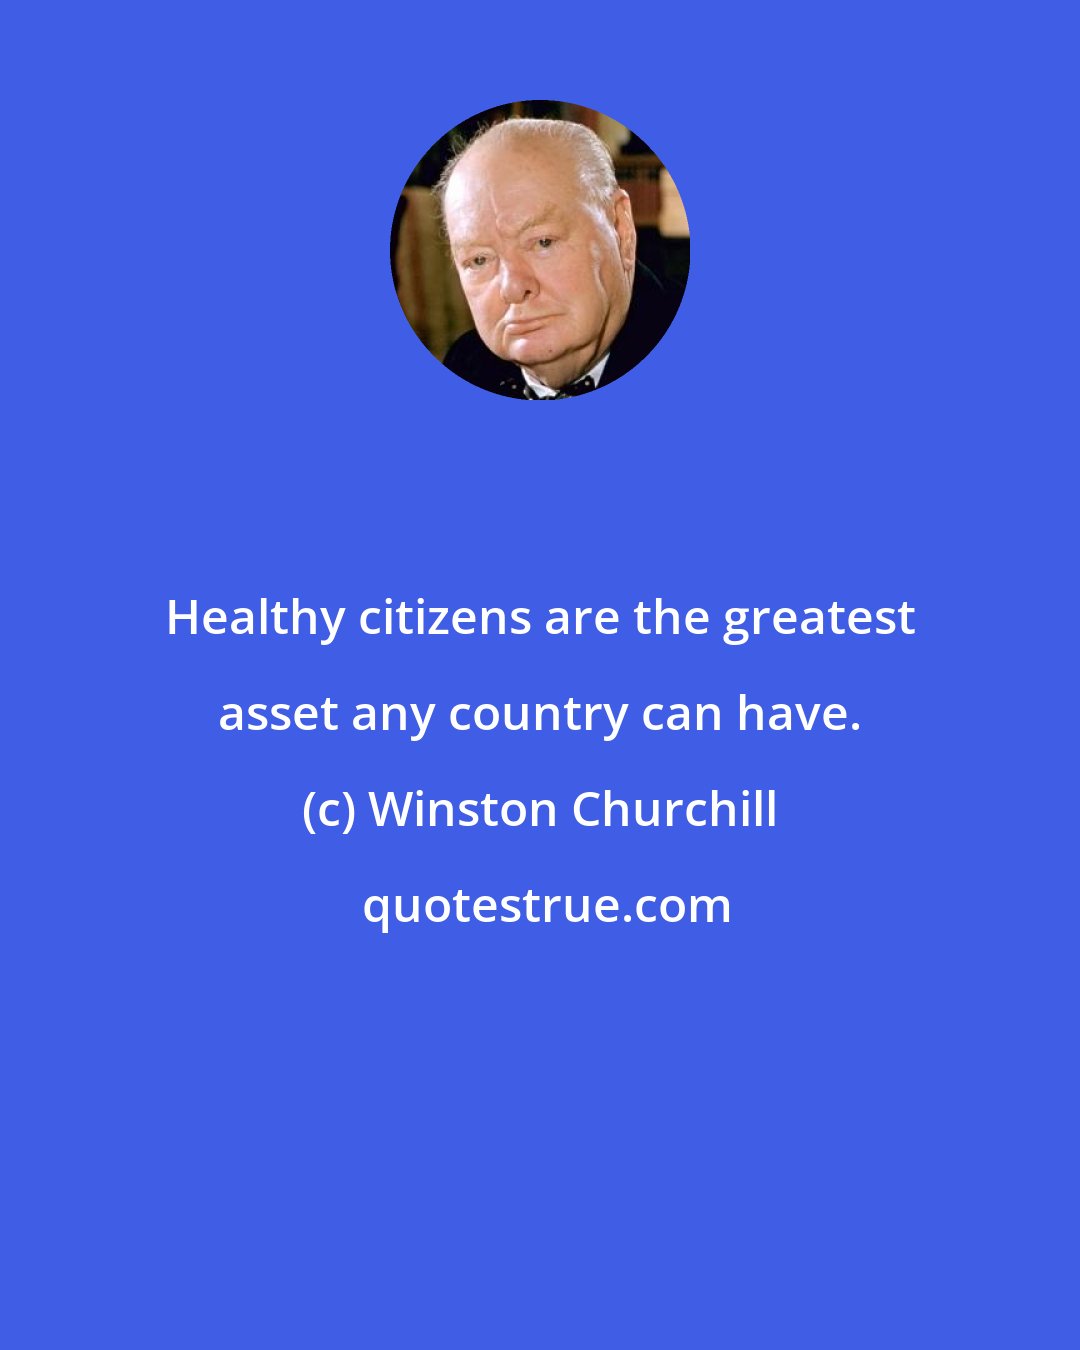 Winston Churchill: Healthy citizens are the greatest asset any country can have.